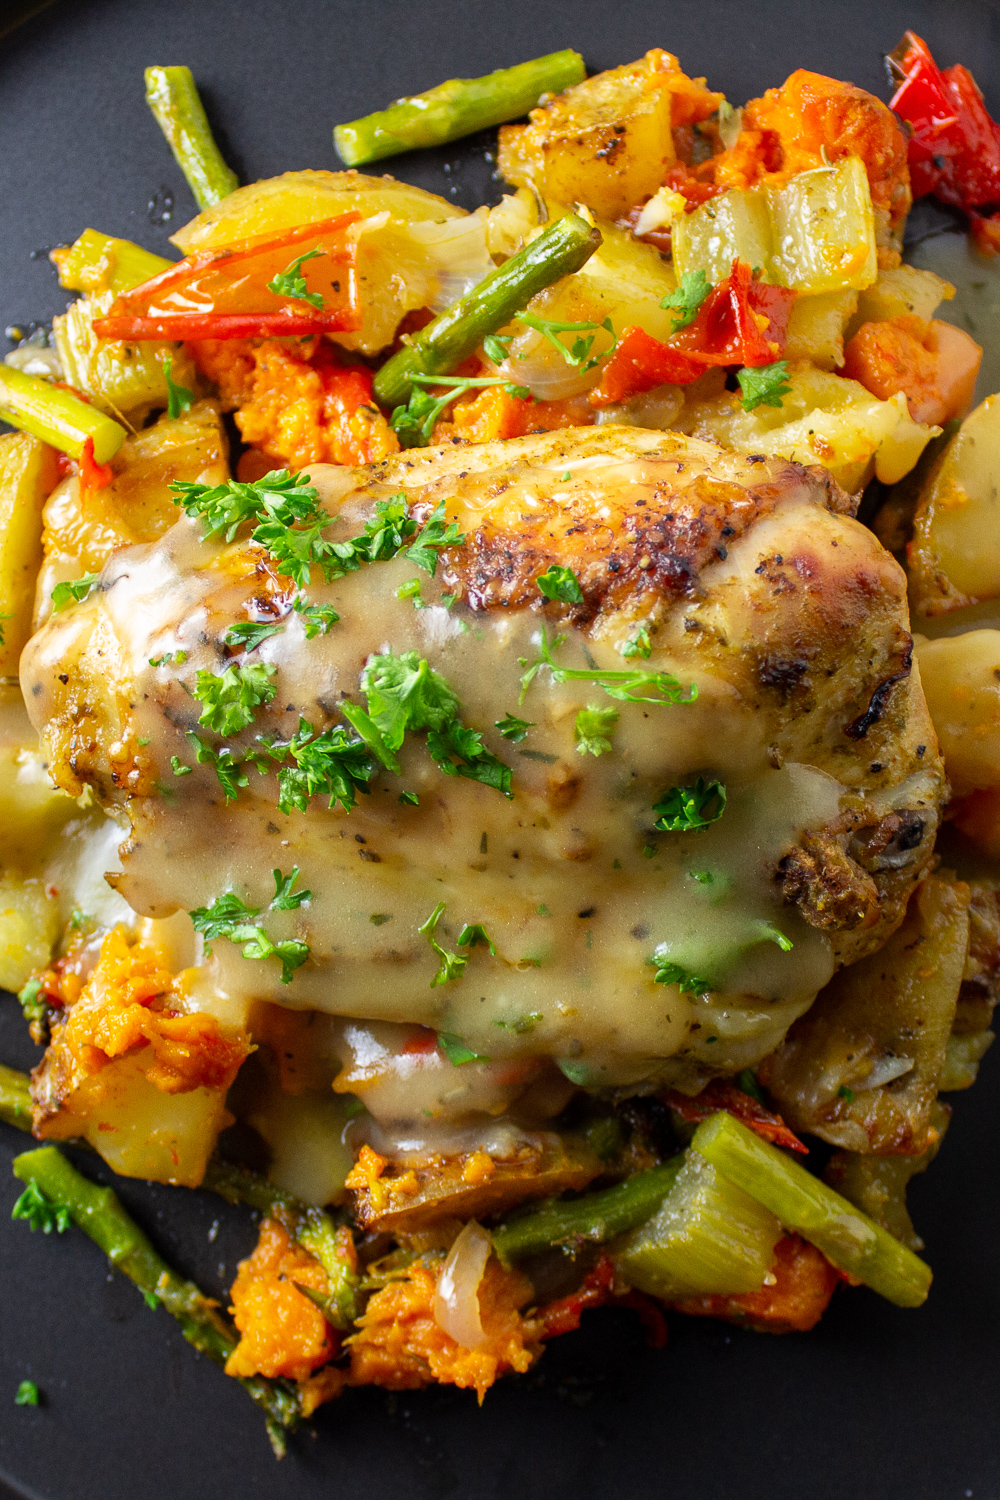 chicken and roasted veggies on plate with gravy p1